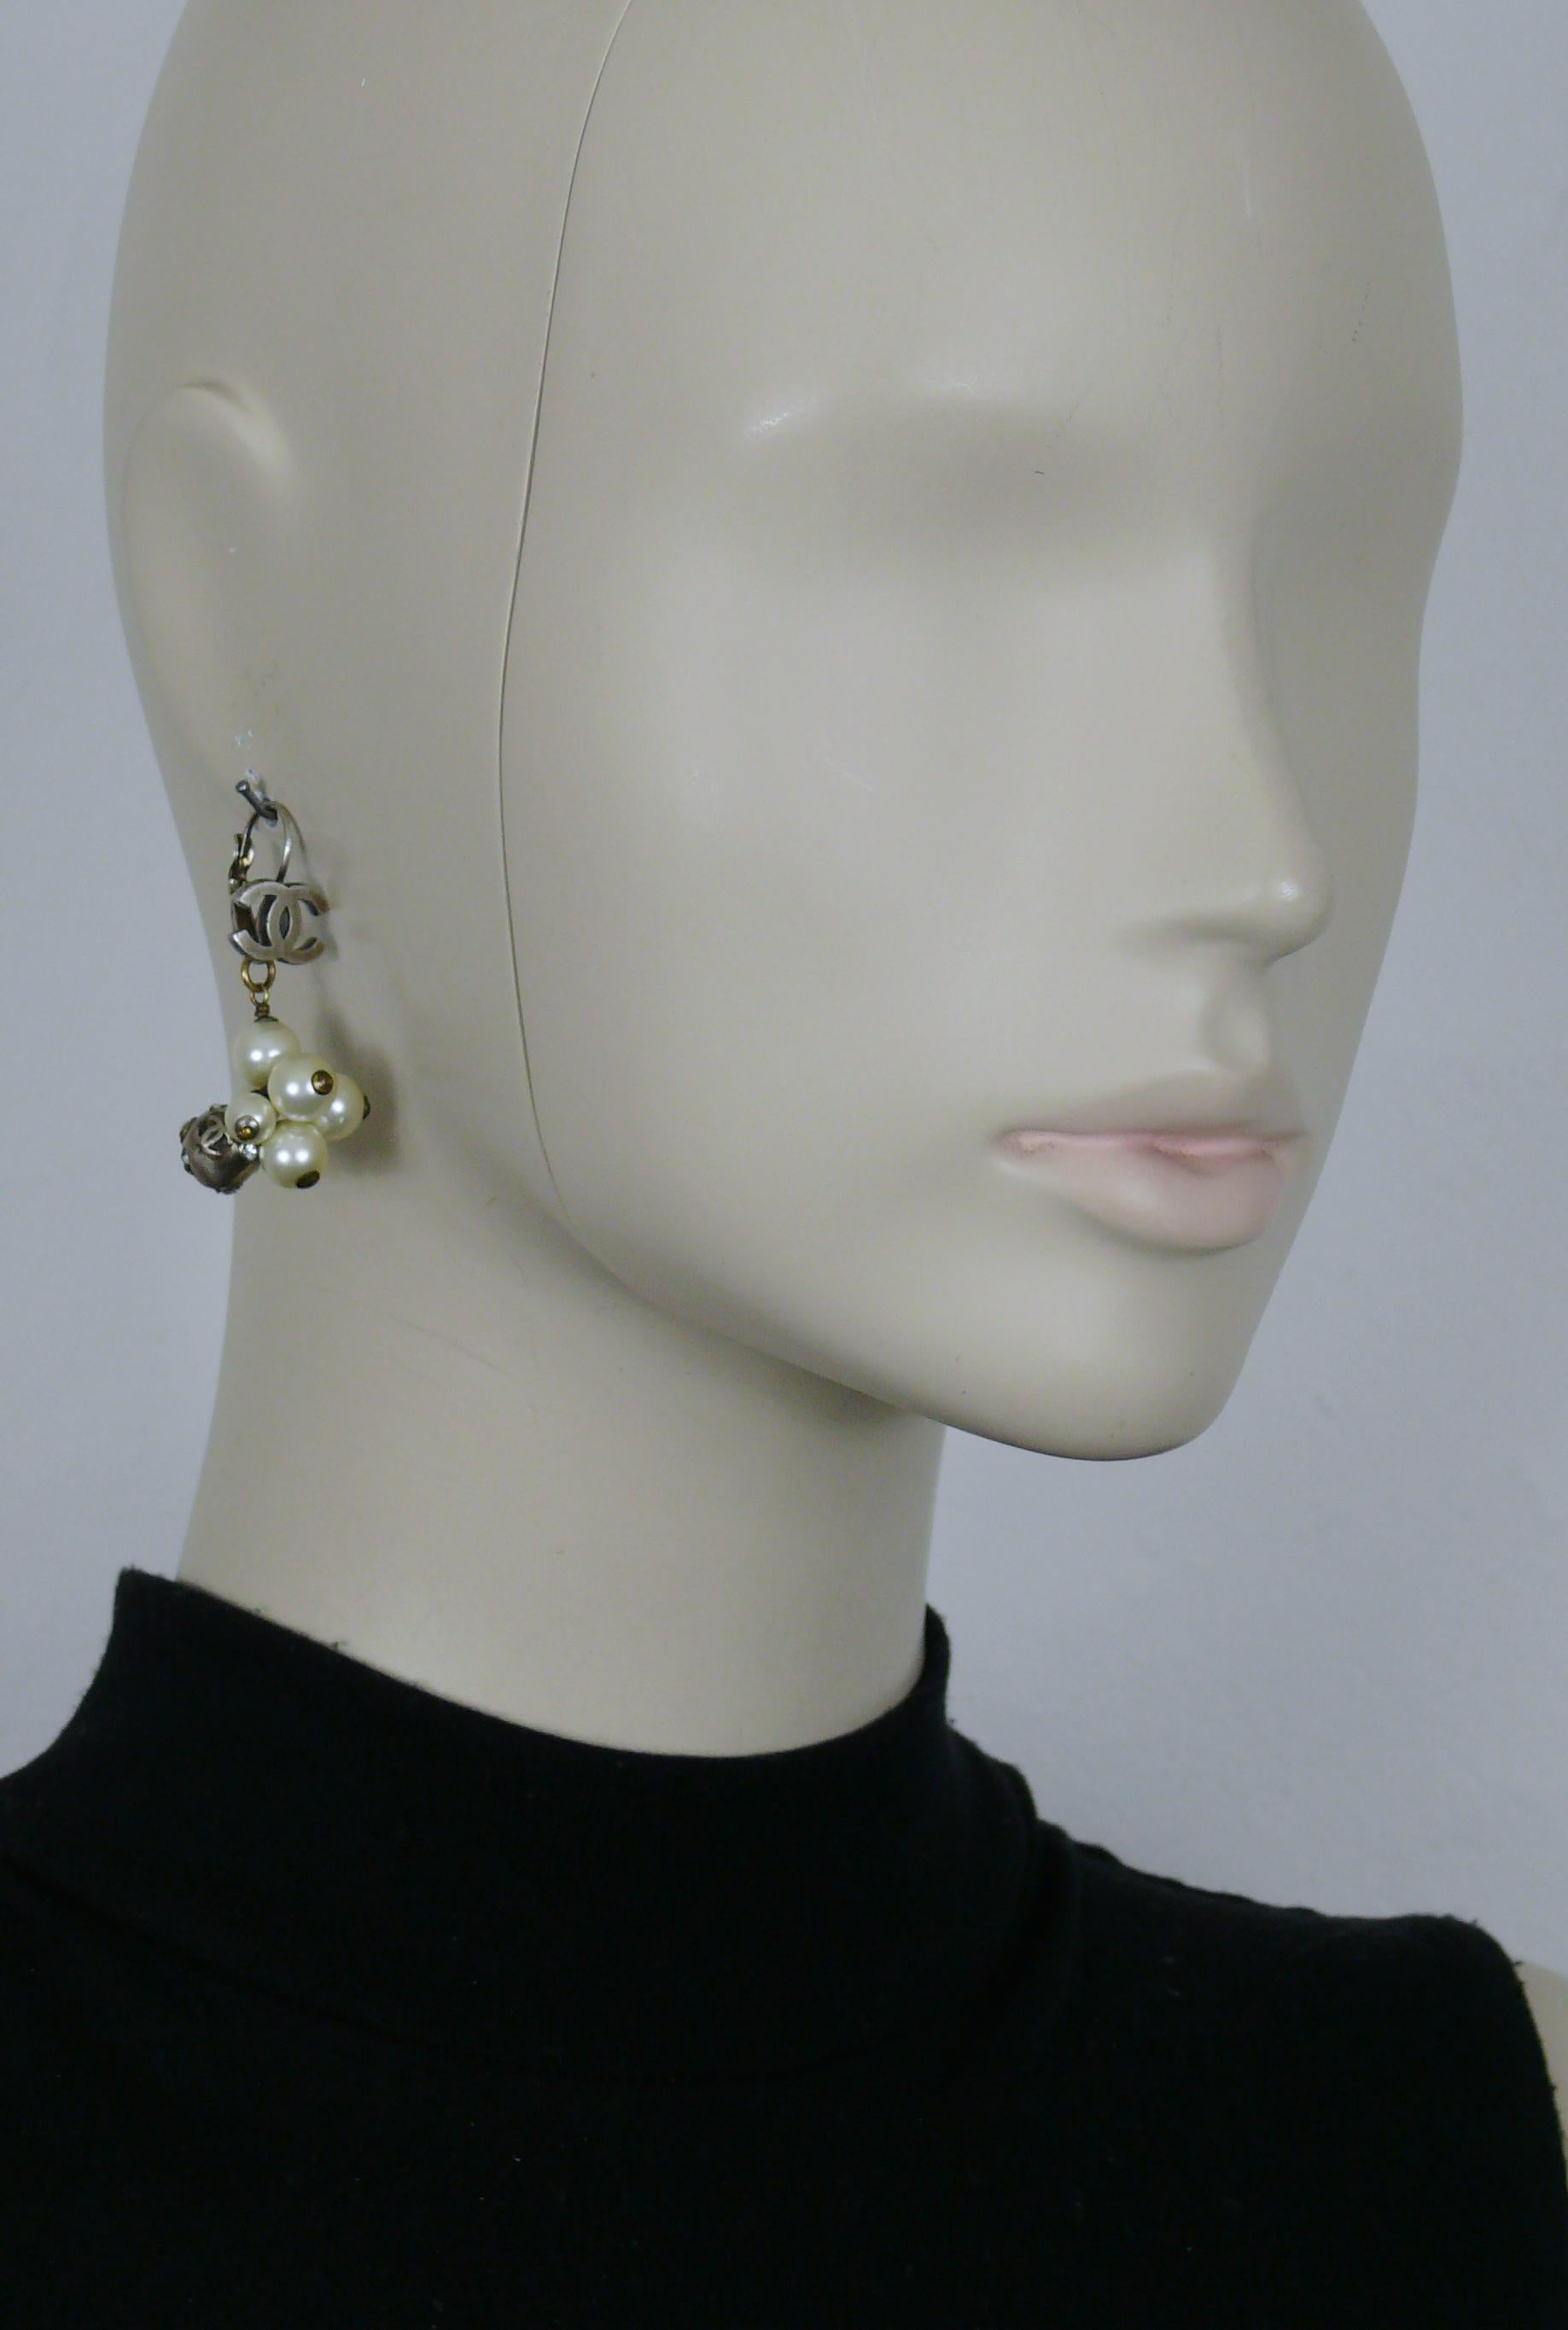 CHANEL antiqued silver tone keeper earrings (for pierced ears) with CC logo featuring a cluster of faux pearls and a metal ball with CC logos and clear crystals.

Fall 2004 Collection.

Embossed CHANEL 04 A Made in France.

Indicative measurements :